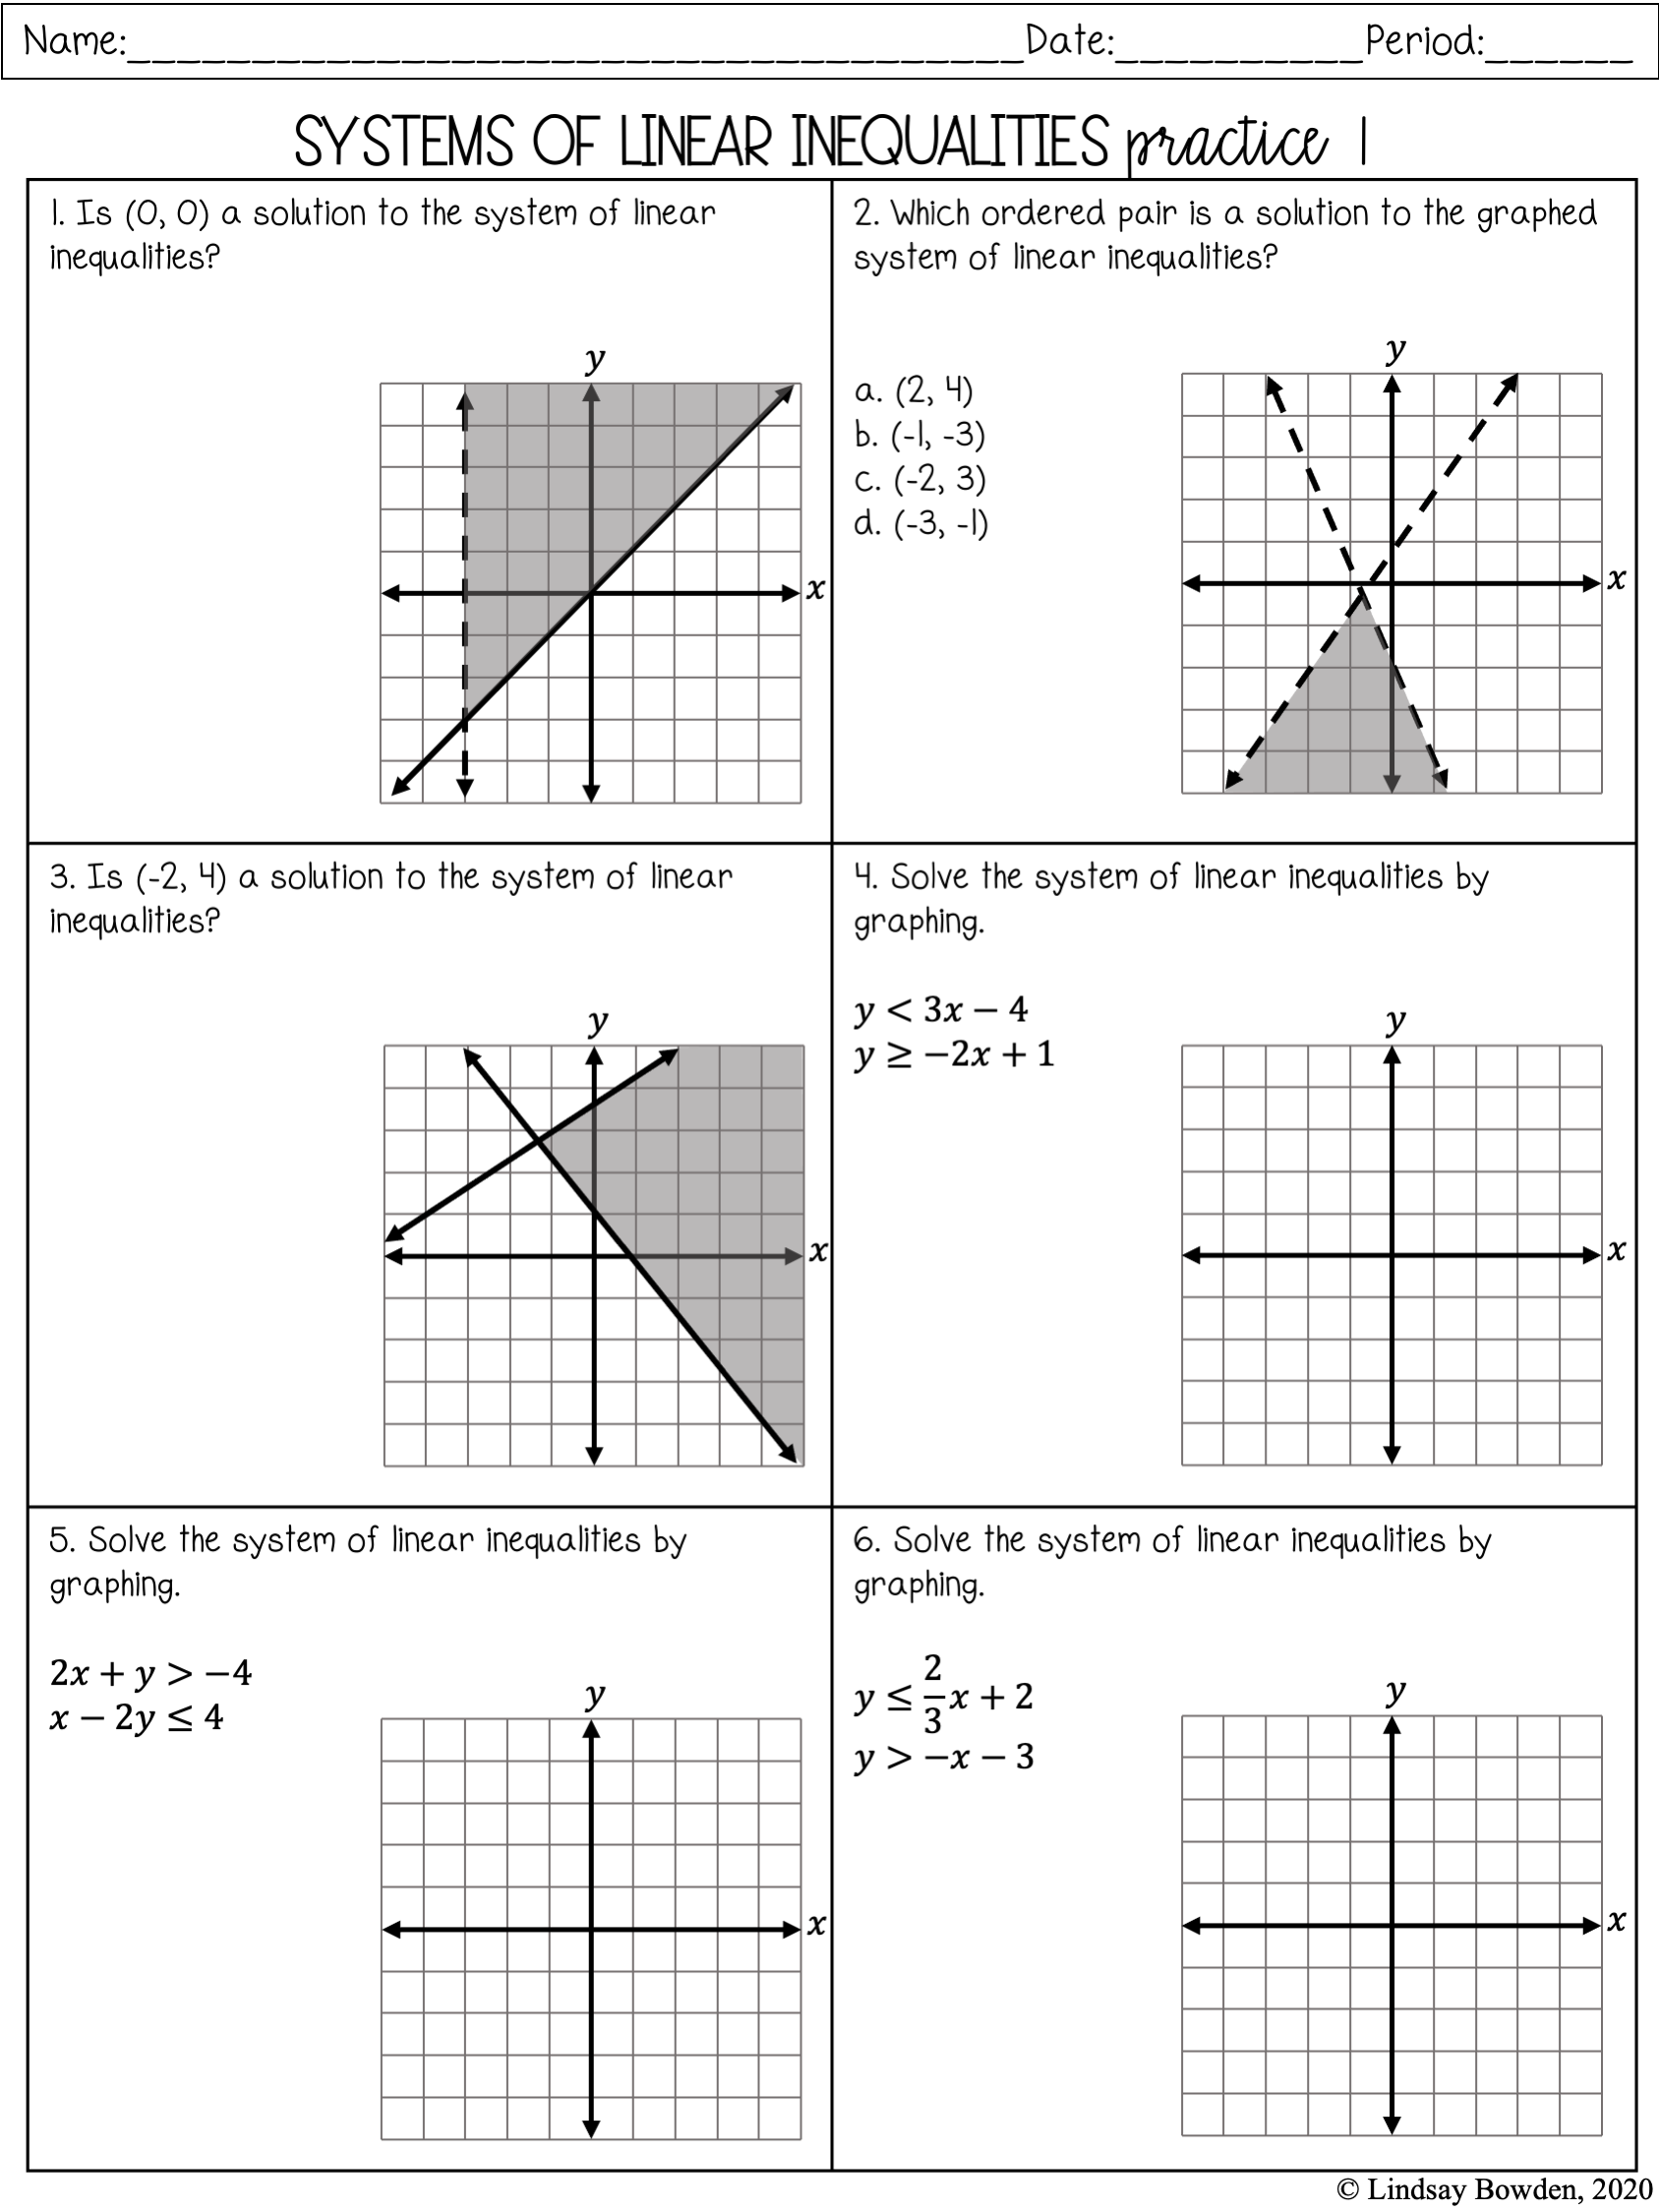 Linear Systems Notes and Worksheets - Lindsay Bowden Throughout Solving Linear Inequalities Worksheet